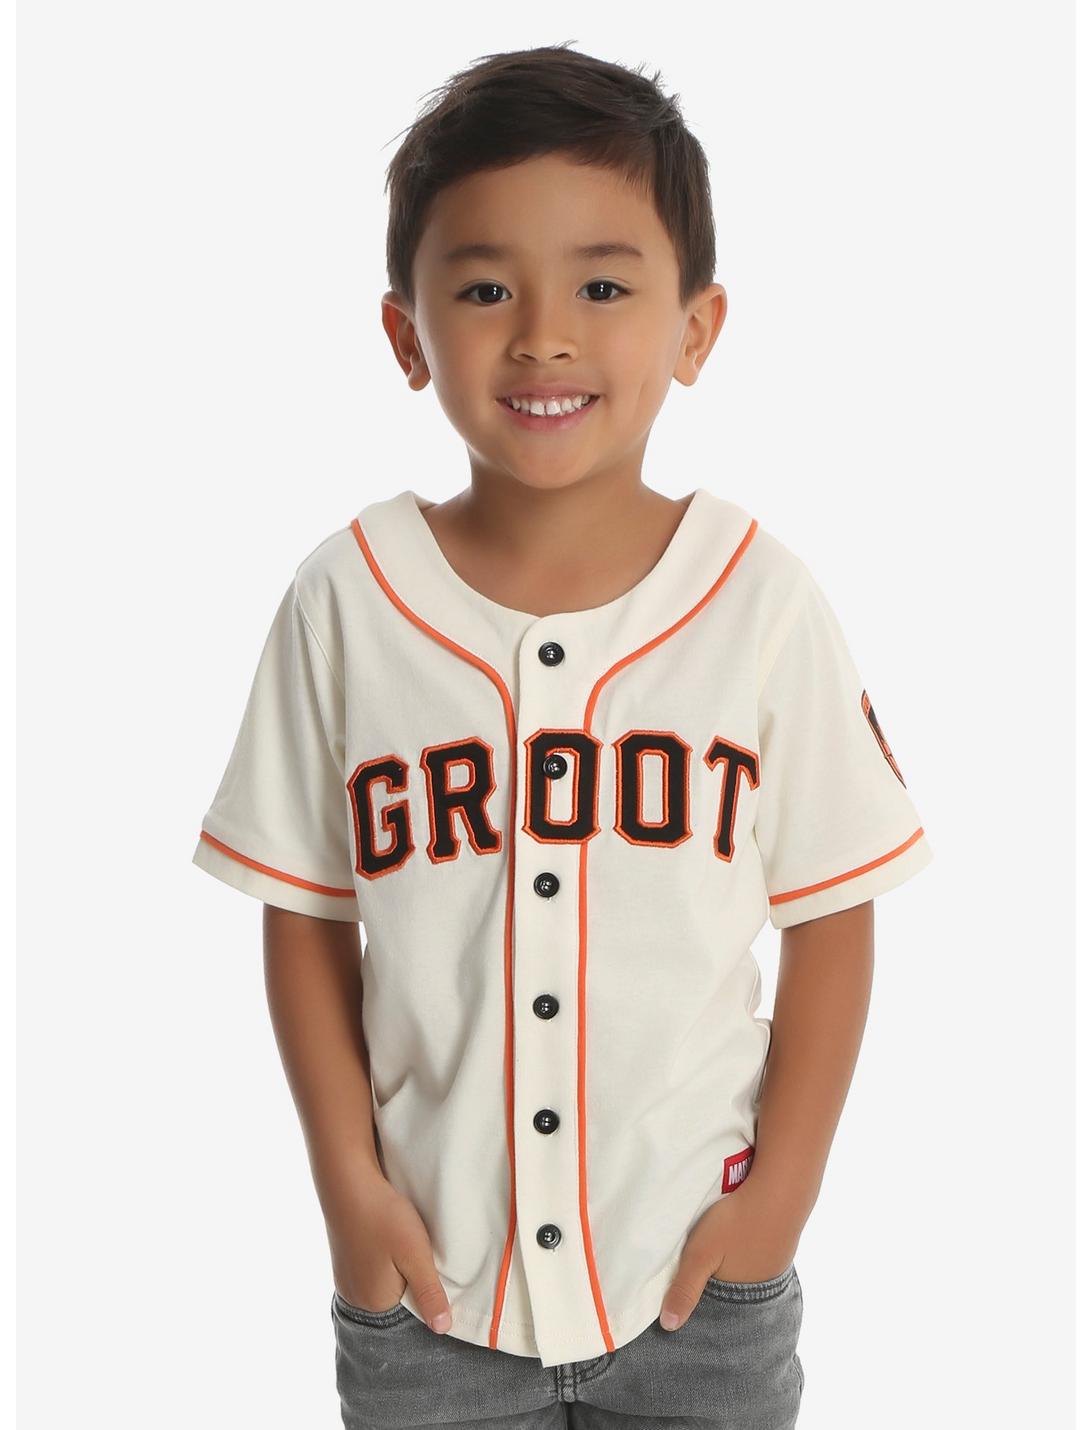 Marvel Guardians Of The Galaxy Groot Toddler Baseball Jersey, WHITE, hi-res